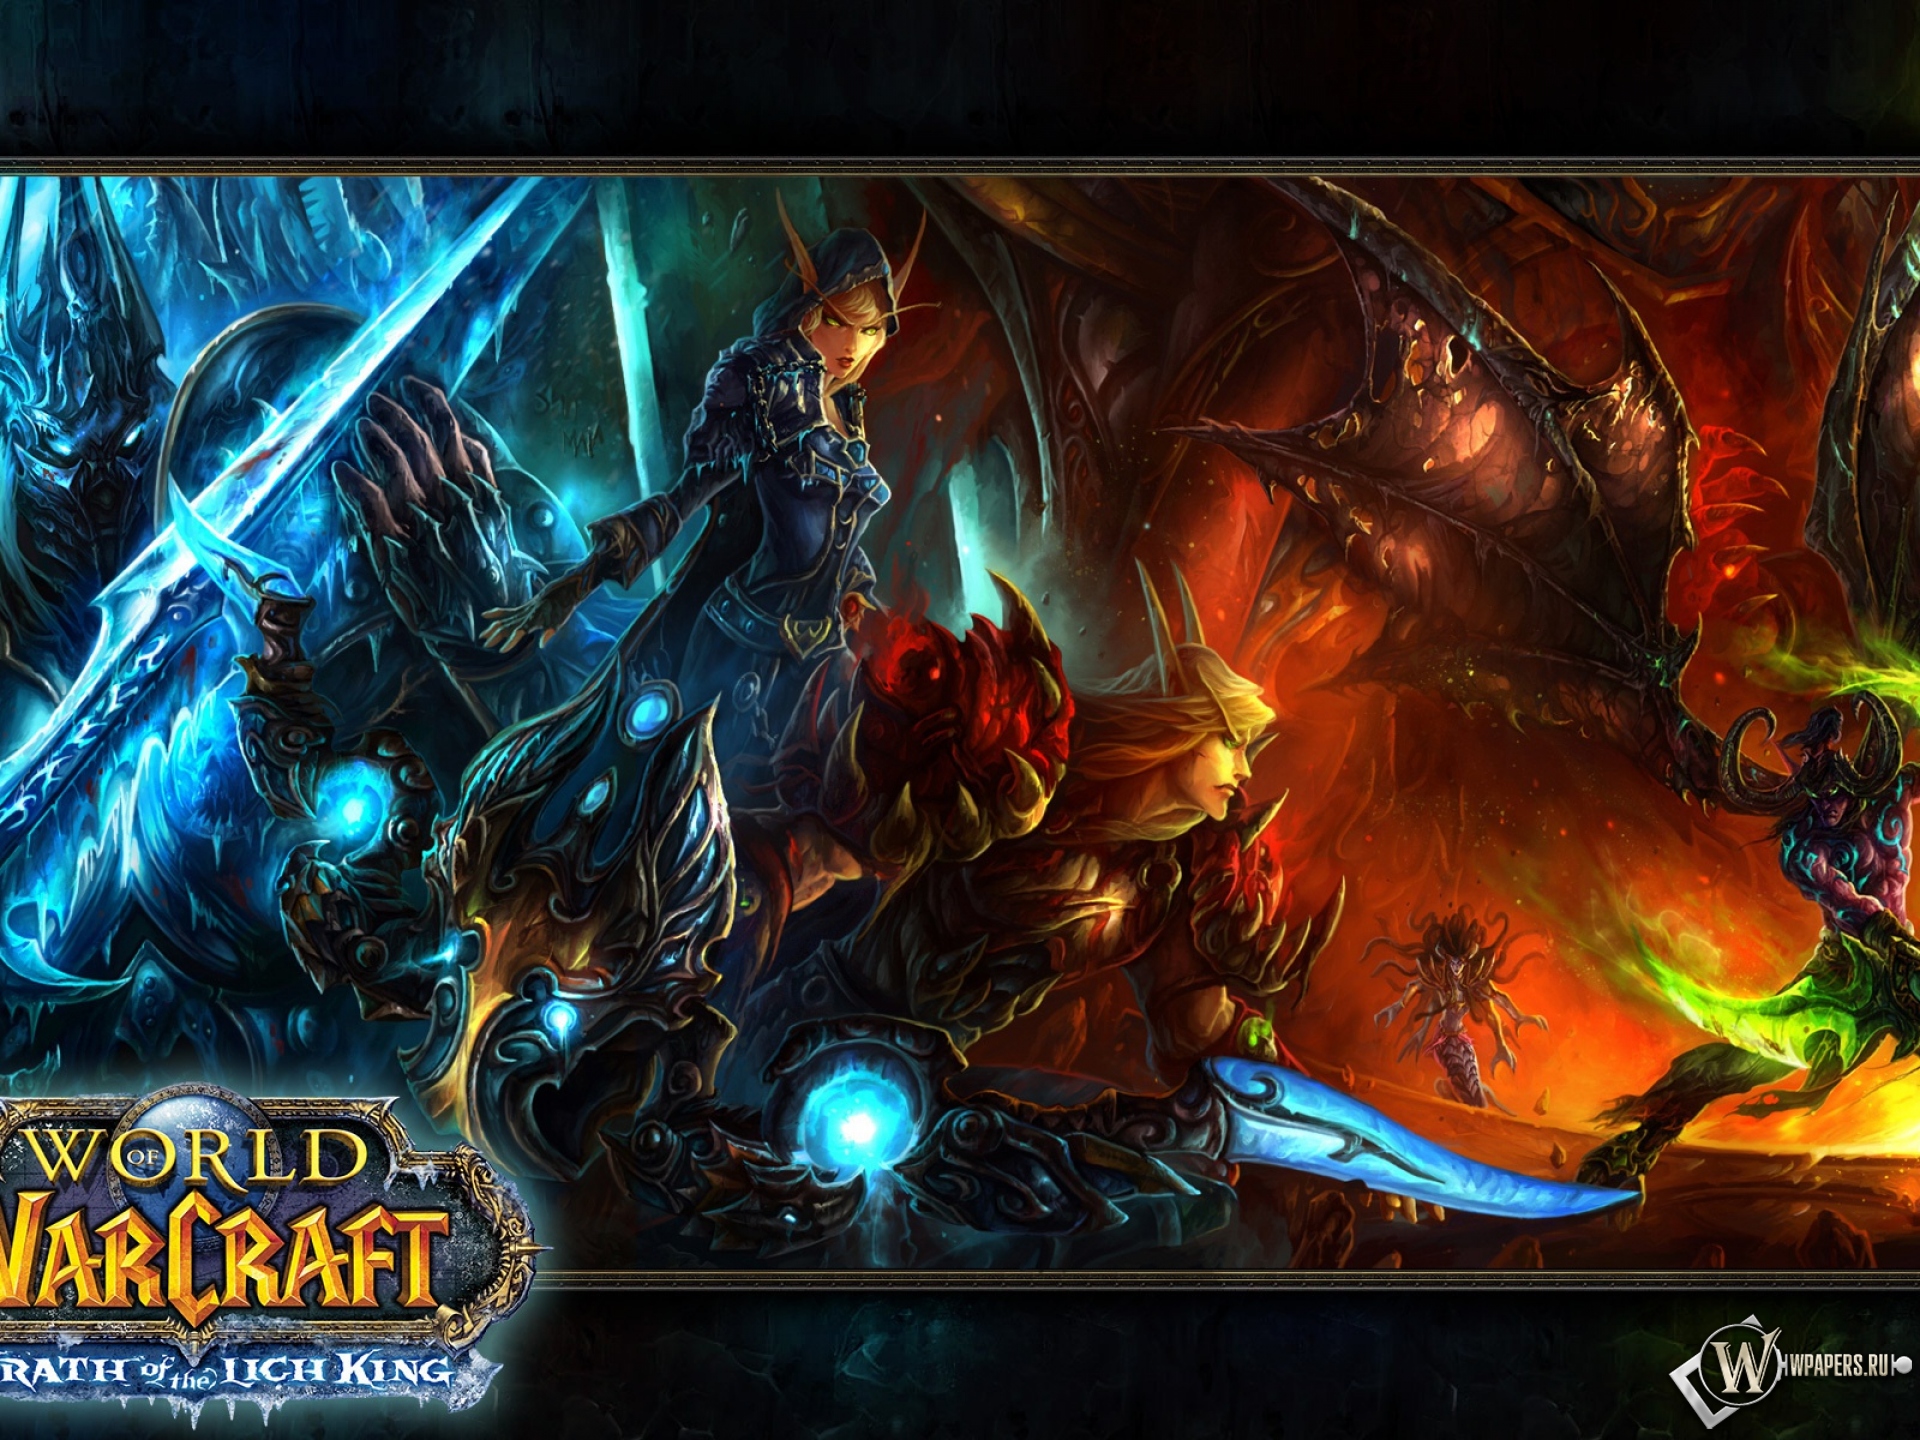 http://wpapers.ru/wallpapers/games/other-games/8801/1920x1440_World-of-warcraft.jpg